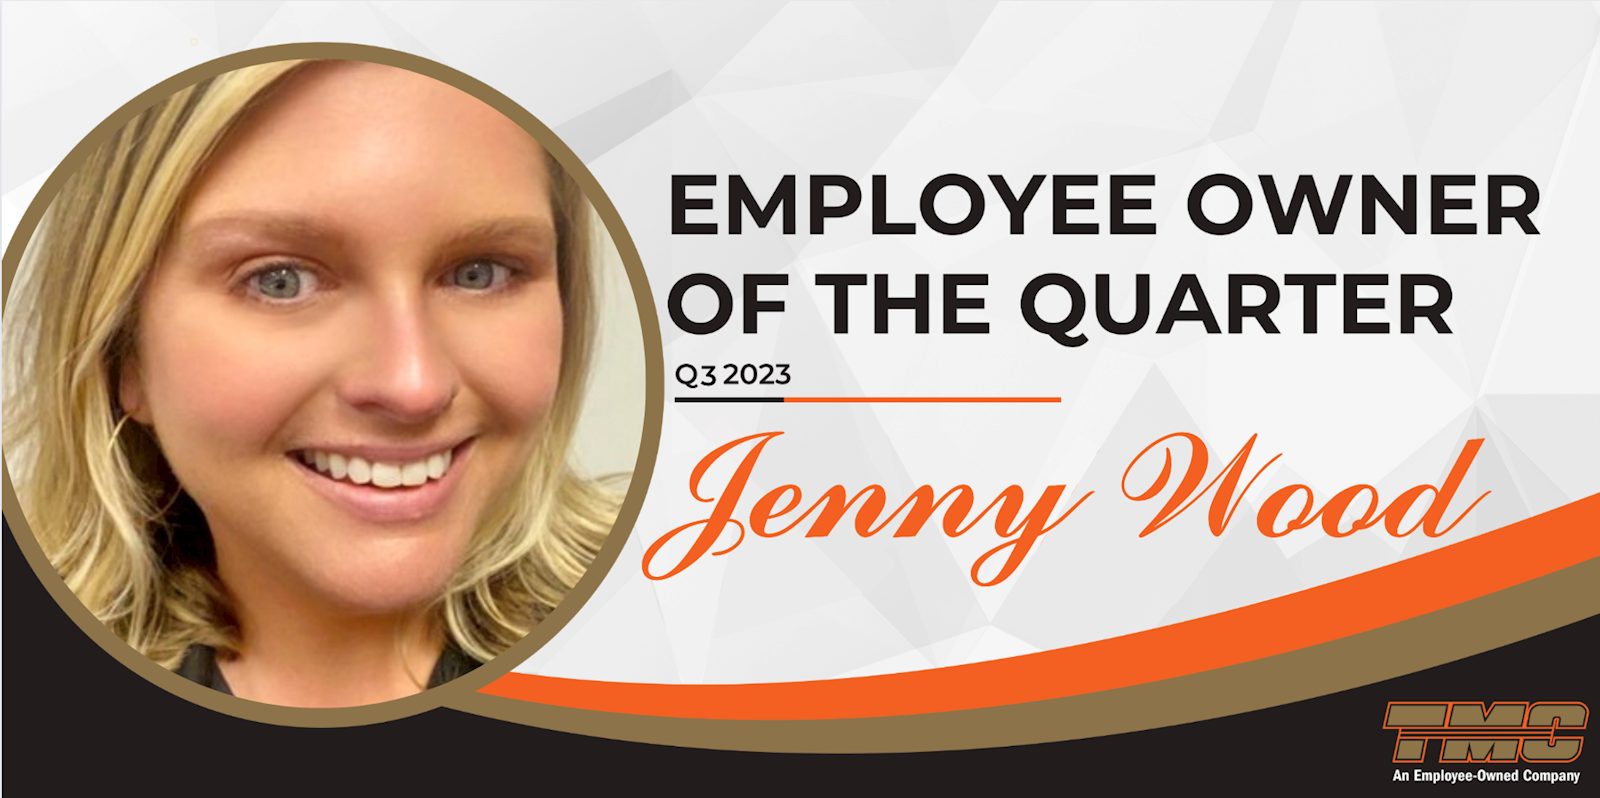 Employee Owner of the Quarter Jenny Wood